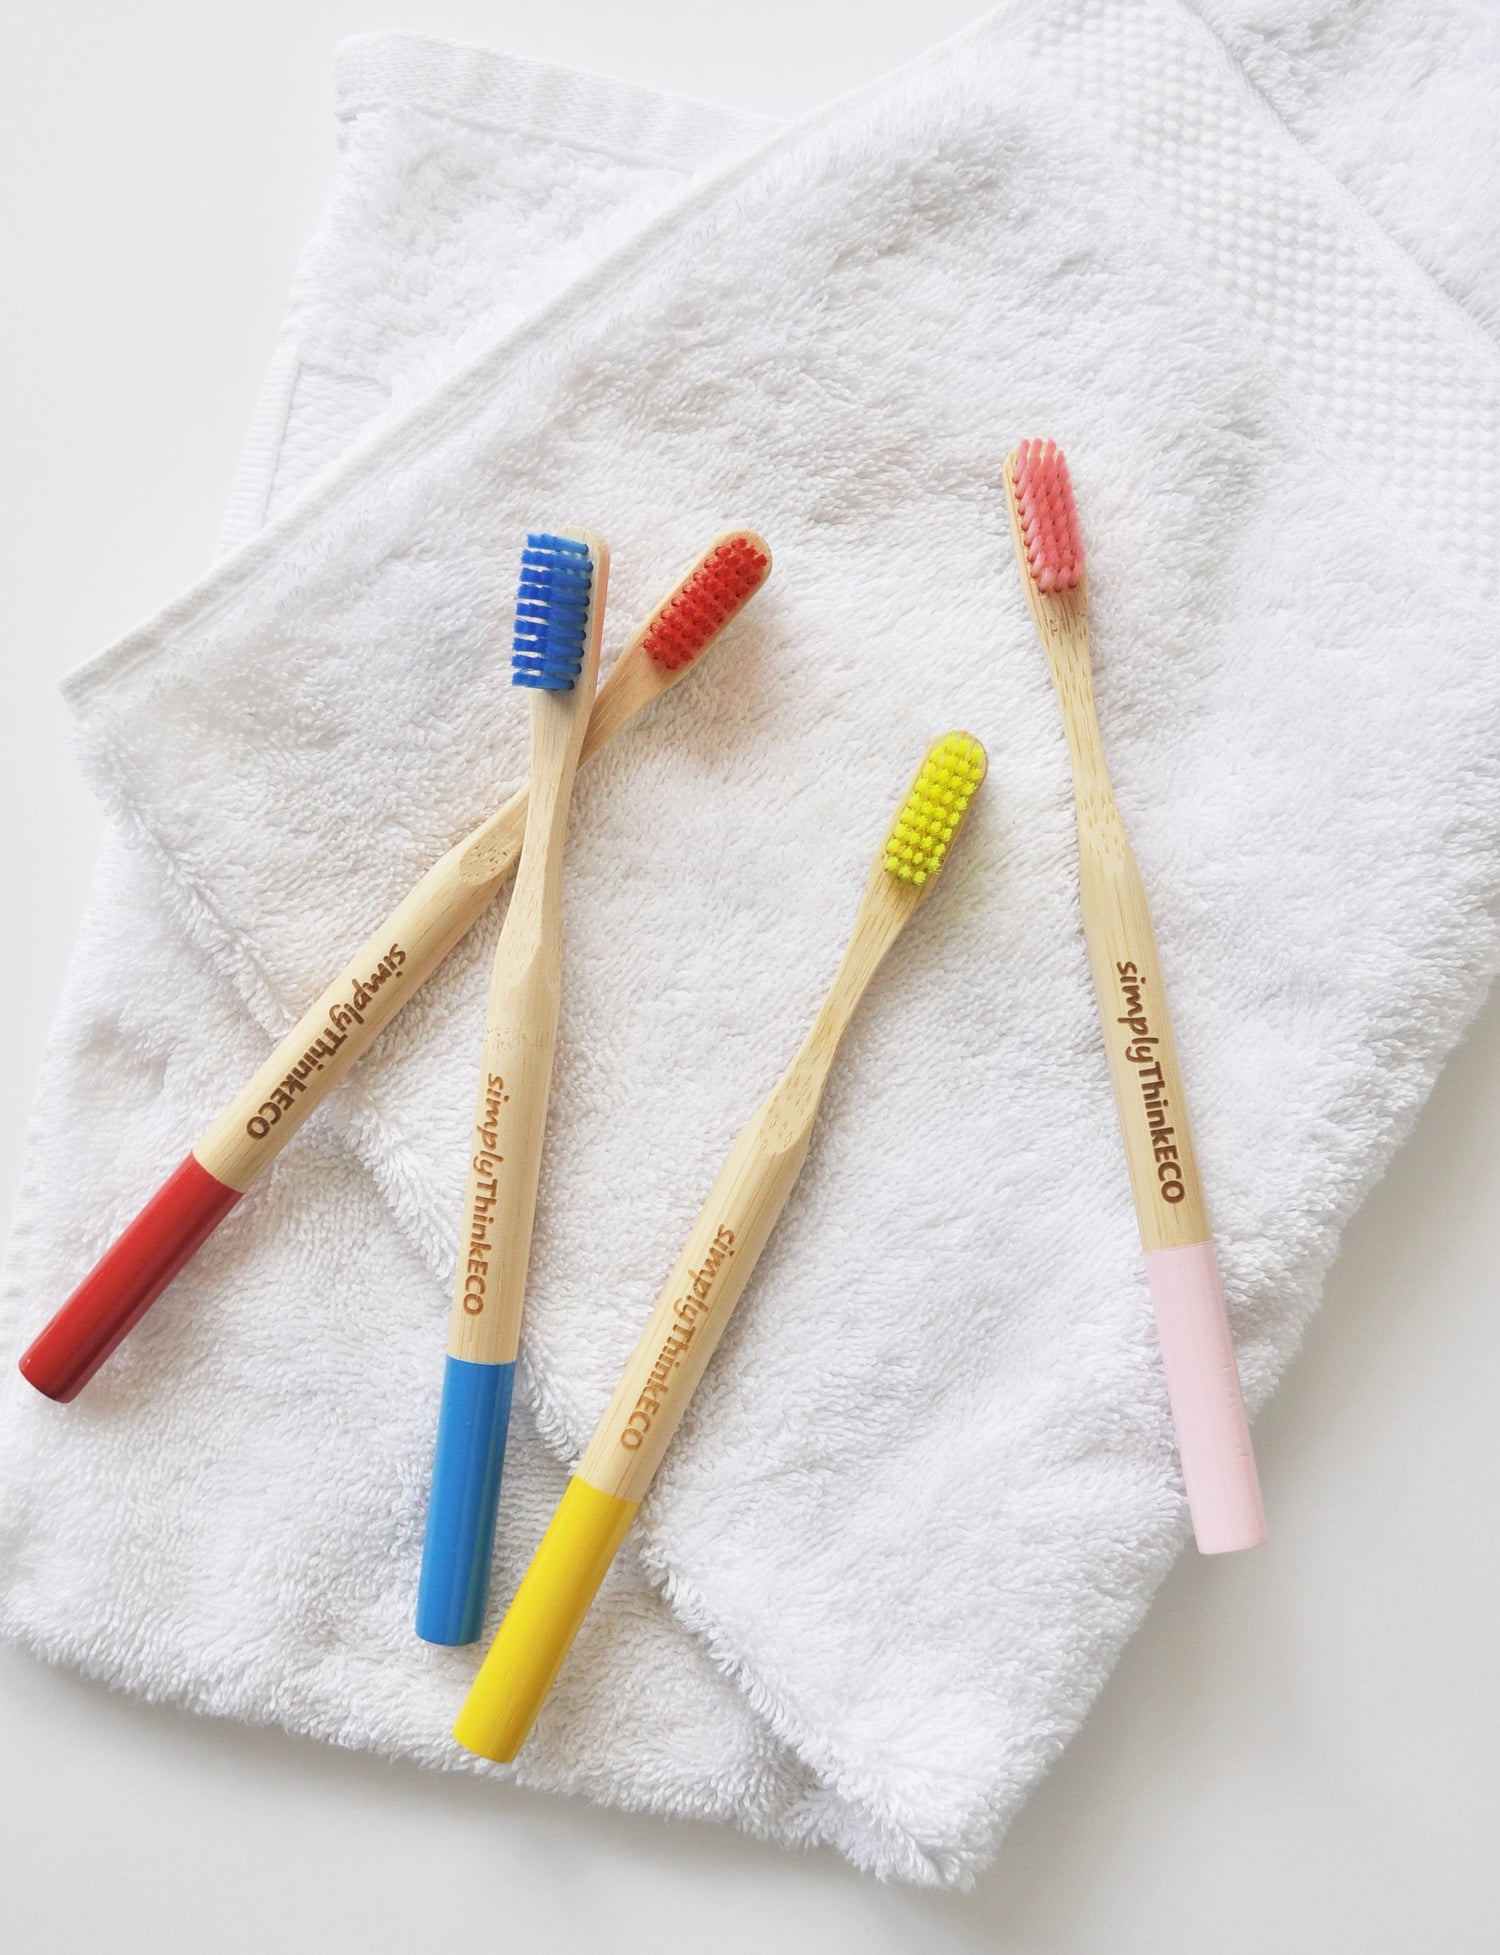 simplythinkeco bamboo adult and kids toothbrushes, Lovely designed and colours that will make your day. kids loves such cute colourful toothbrushes. Want to love brushing your teeth, buy our simplythinkeco bamboo toothbrushes.